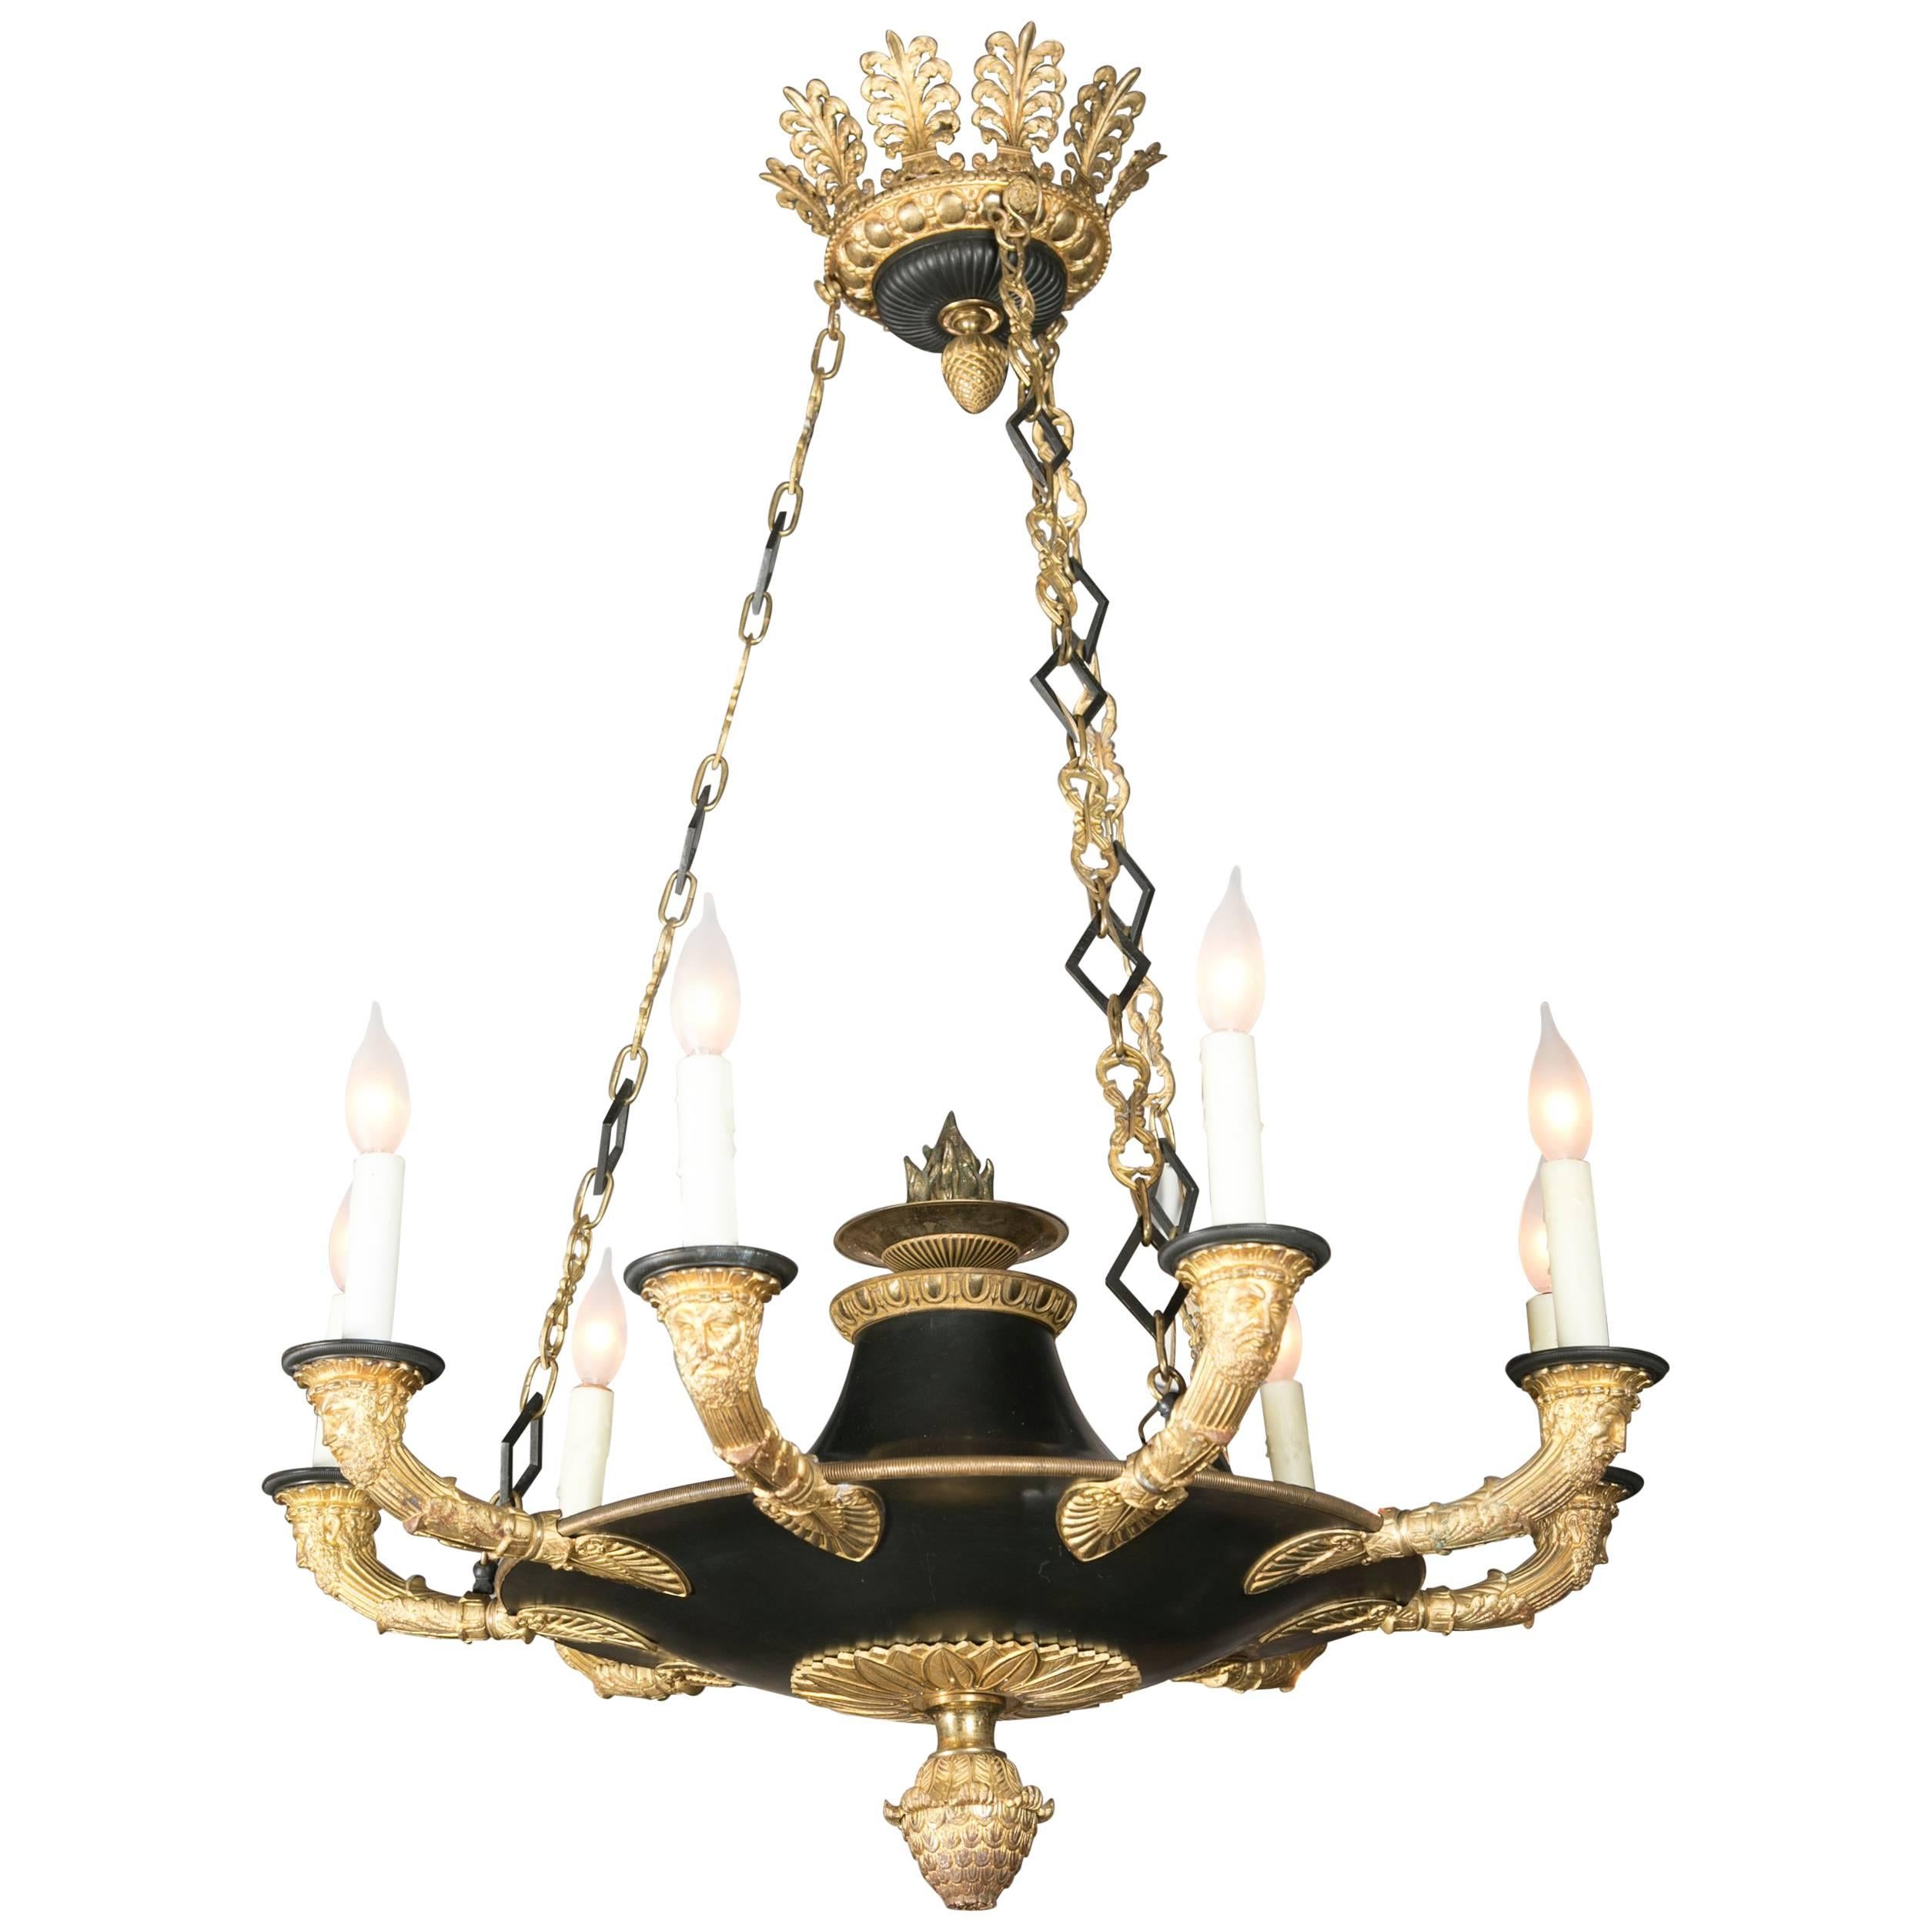 French D'ore Gilt and Patinated Bronze Nine-Light Chandelier